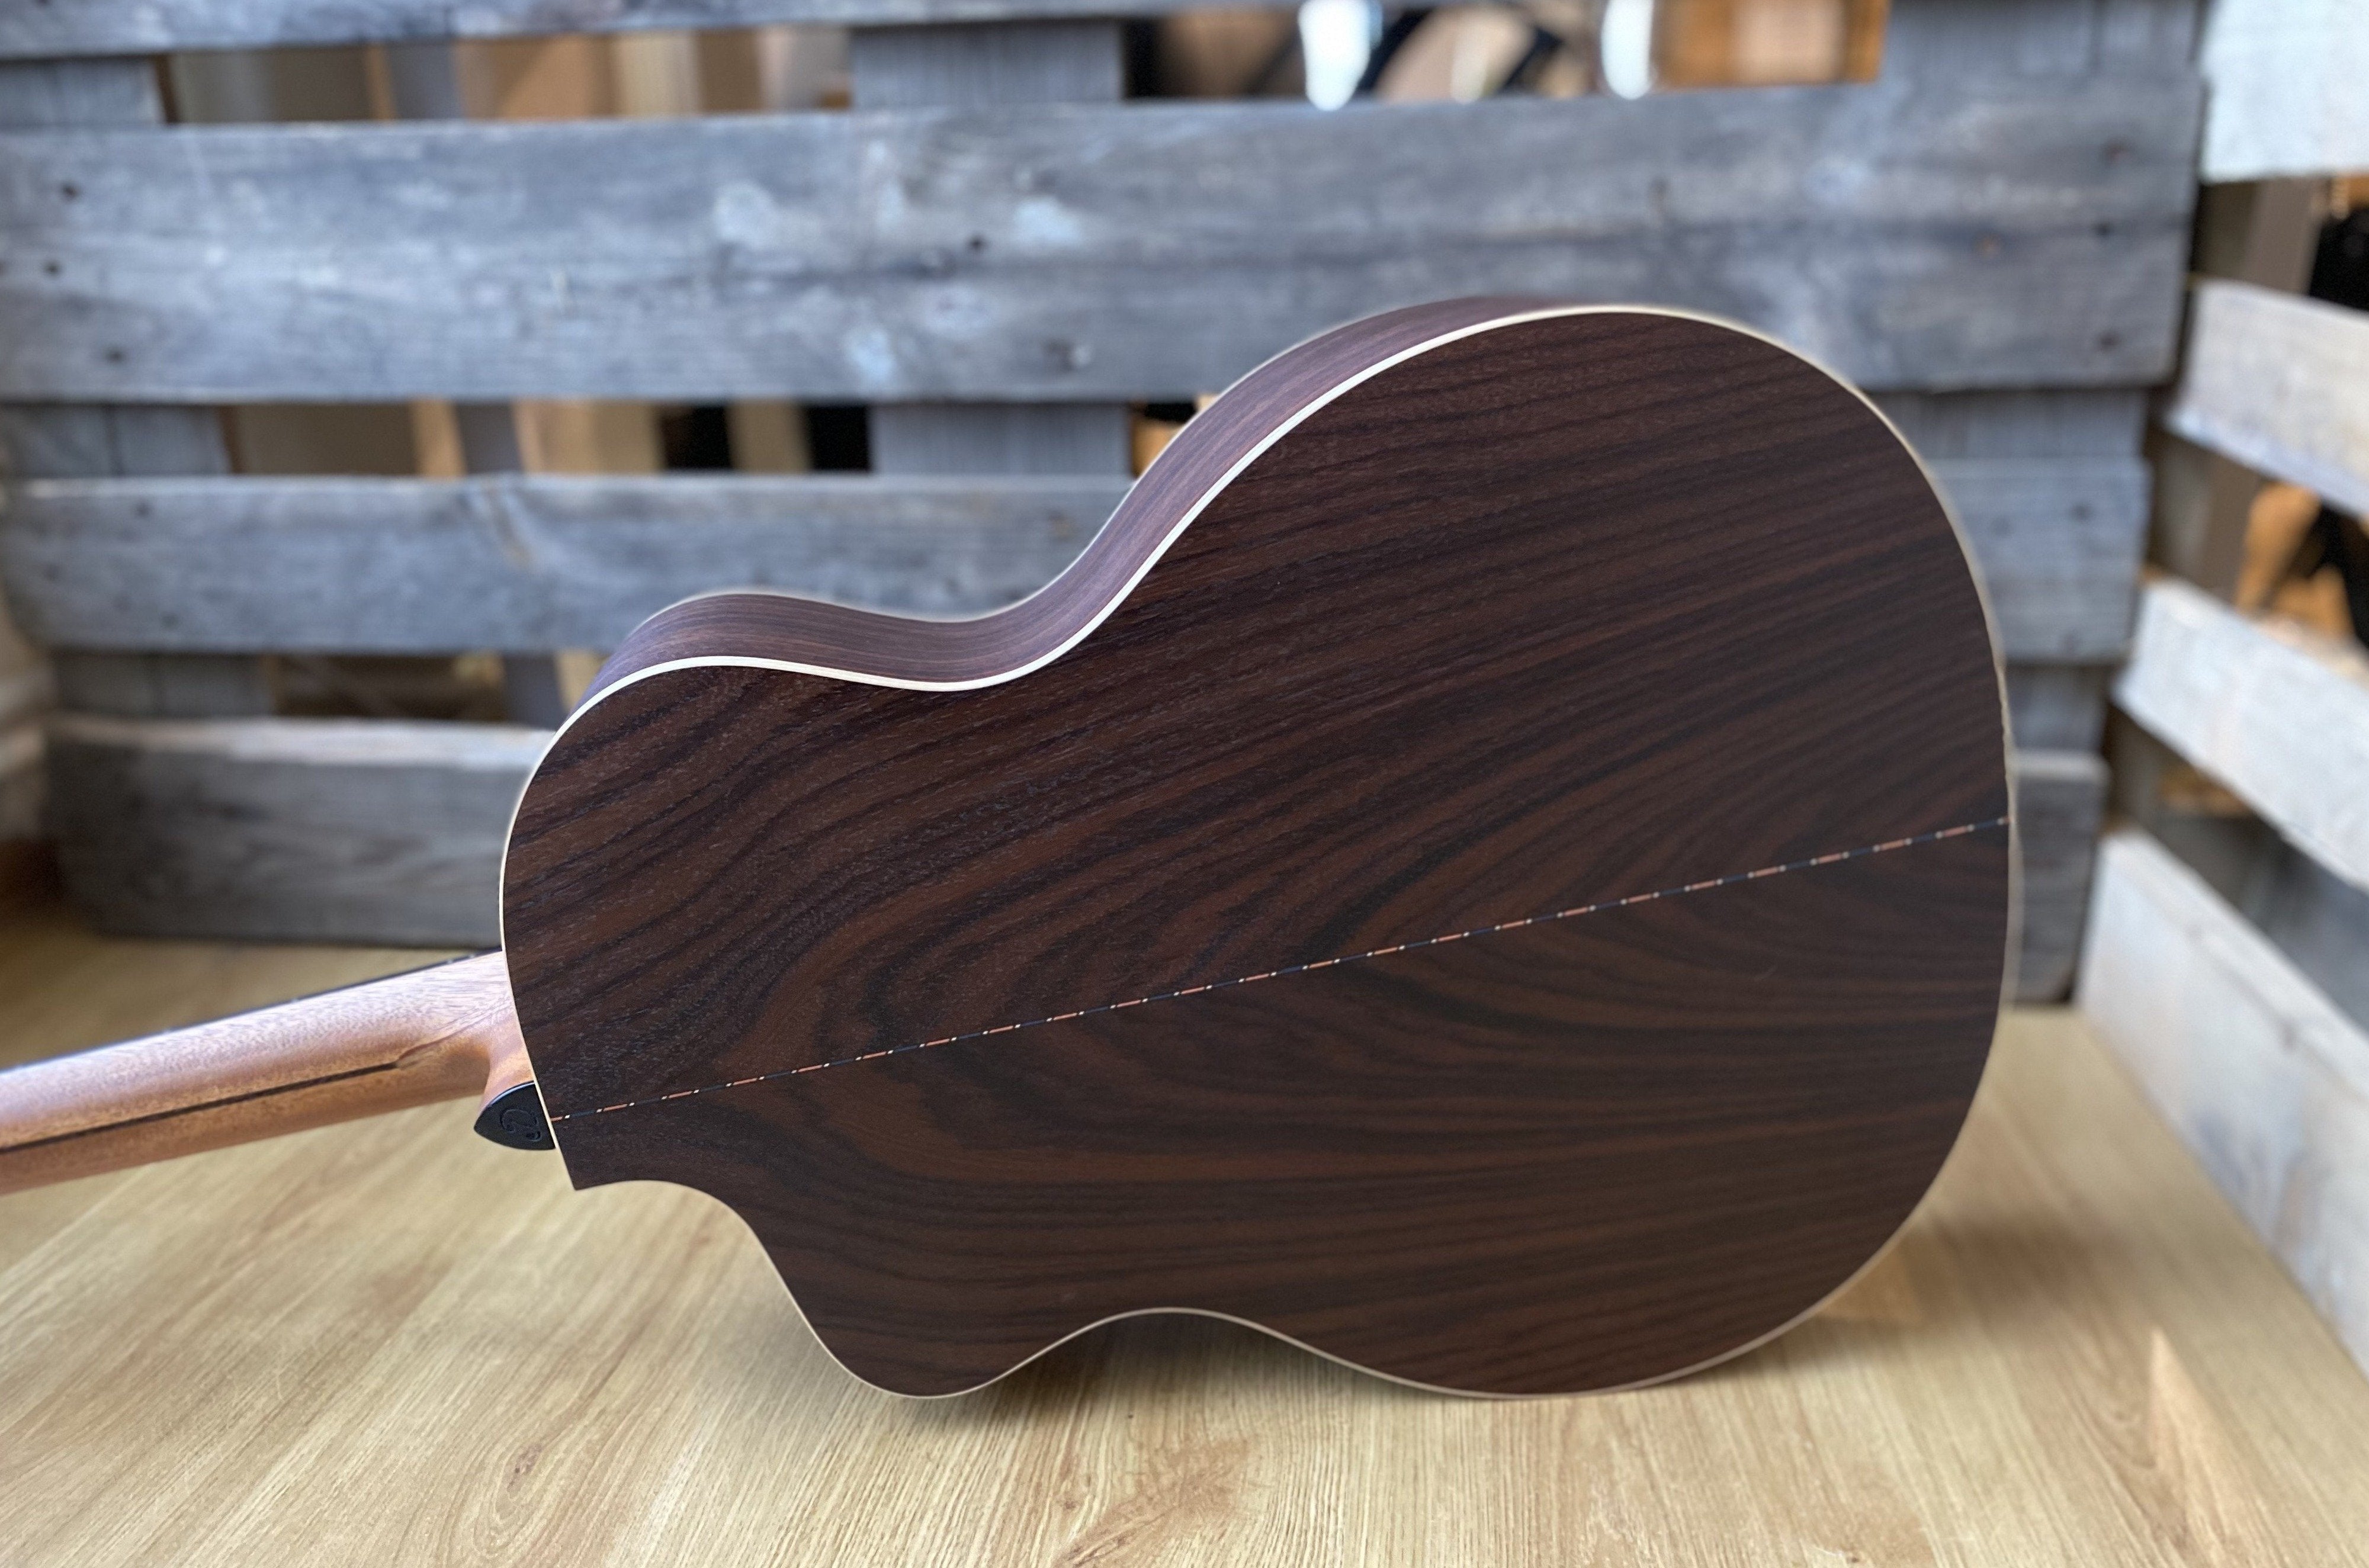 Dowina Rosewood (Ceres) GAC-SE Blend, Electro Acoustic Guitar for sale at Richards Guitars.